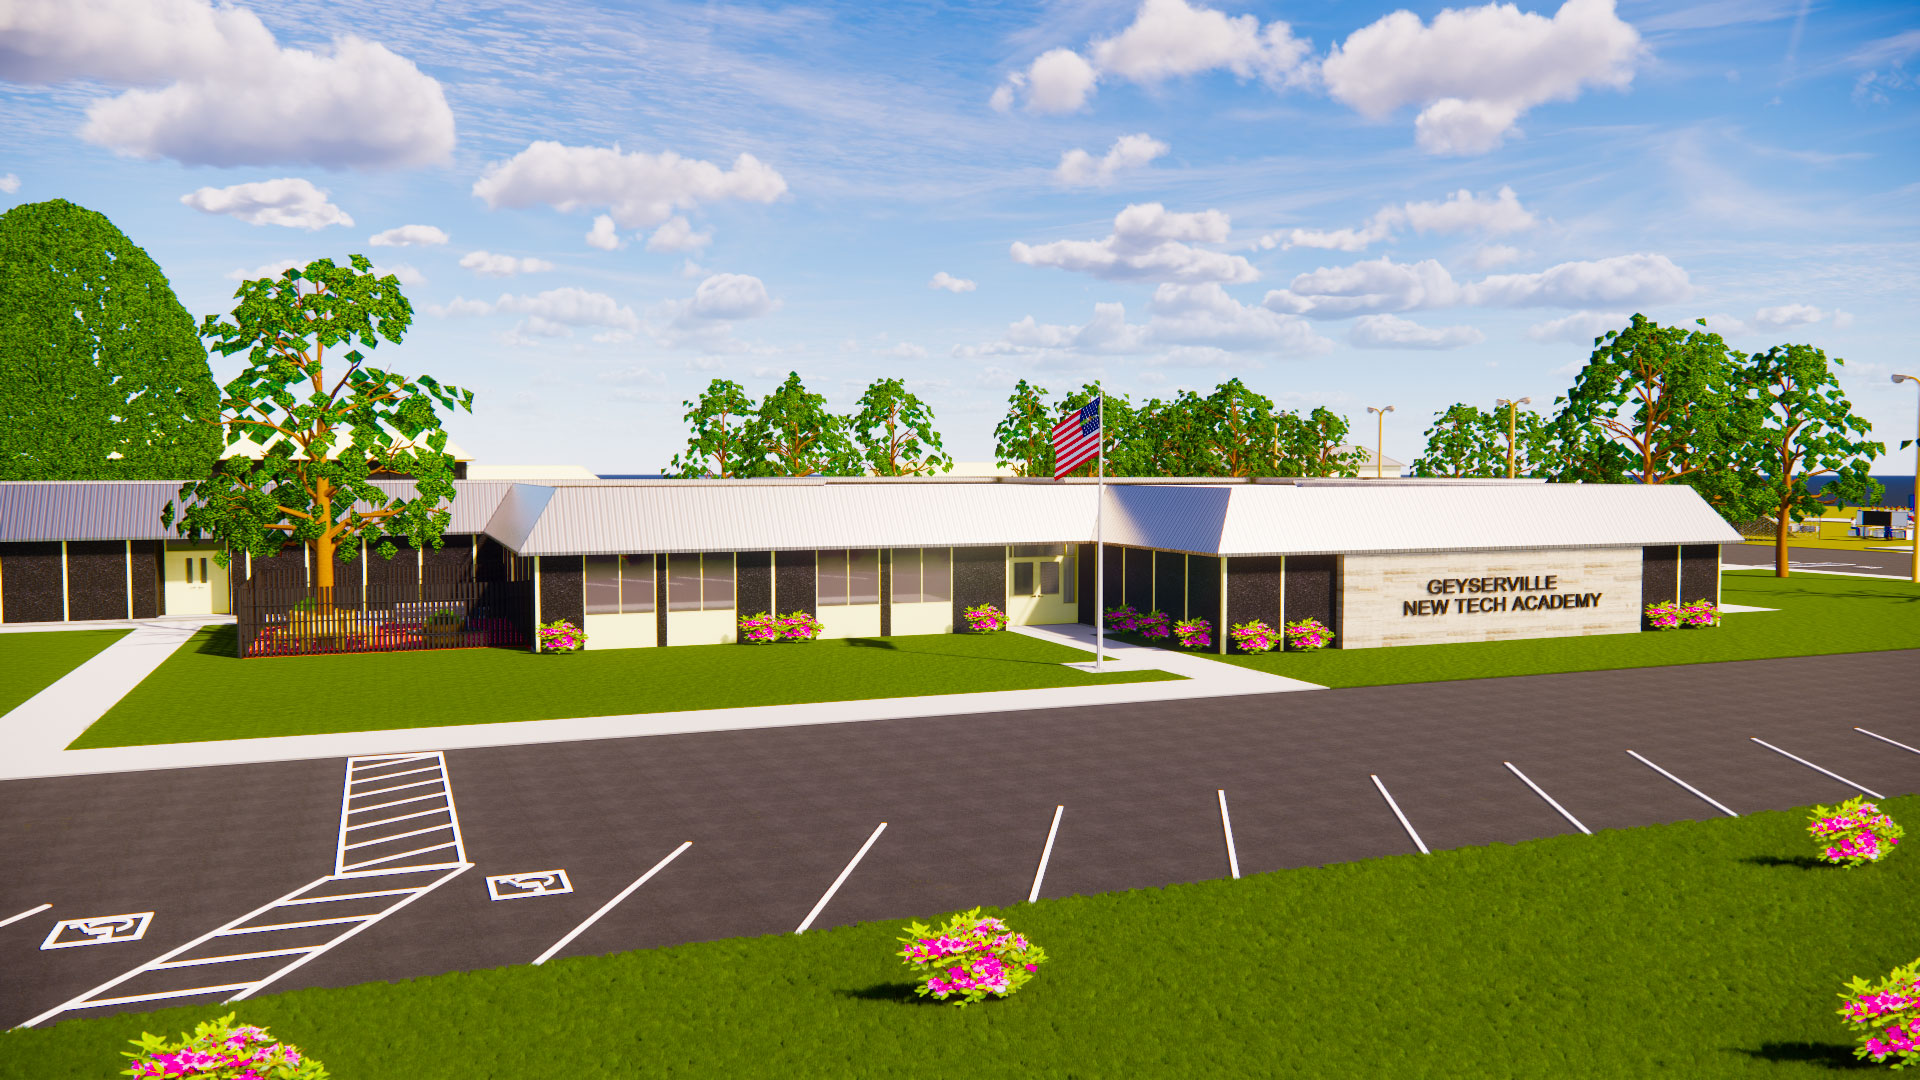 Rendering of exterior of school, with paneled black walls and white roof.